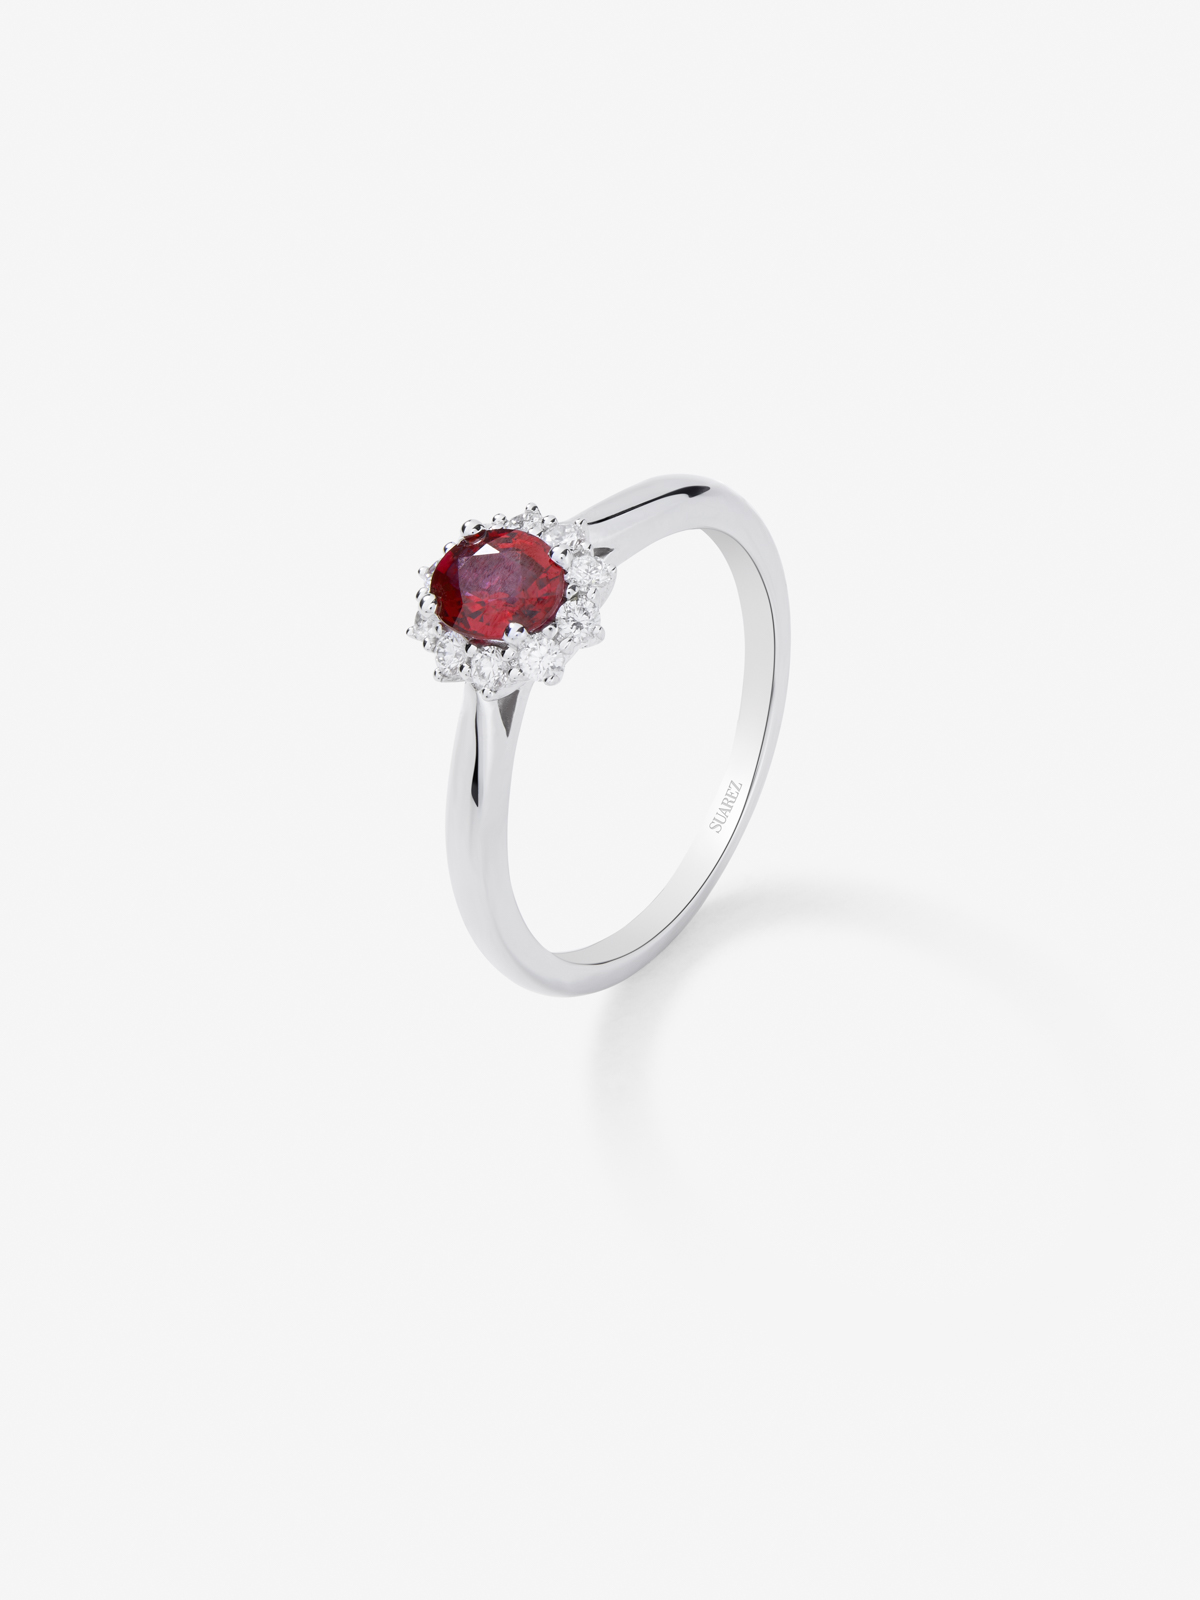 18K White Gold Ring with Red Vivid Ruba in 0.53 cts and white diamonds in bright 0.18 cts